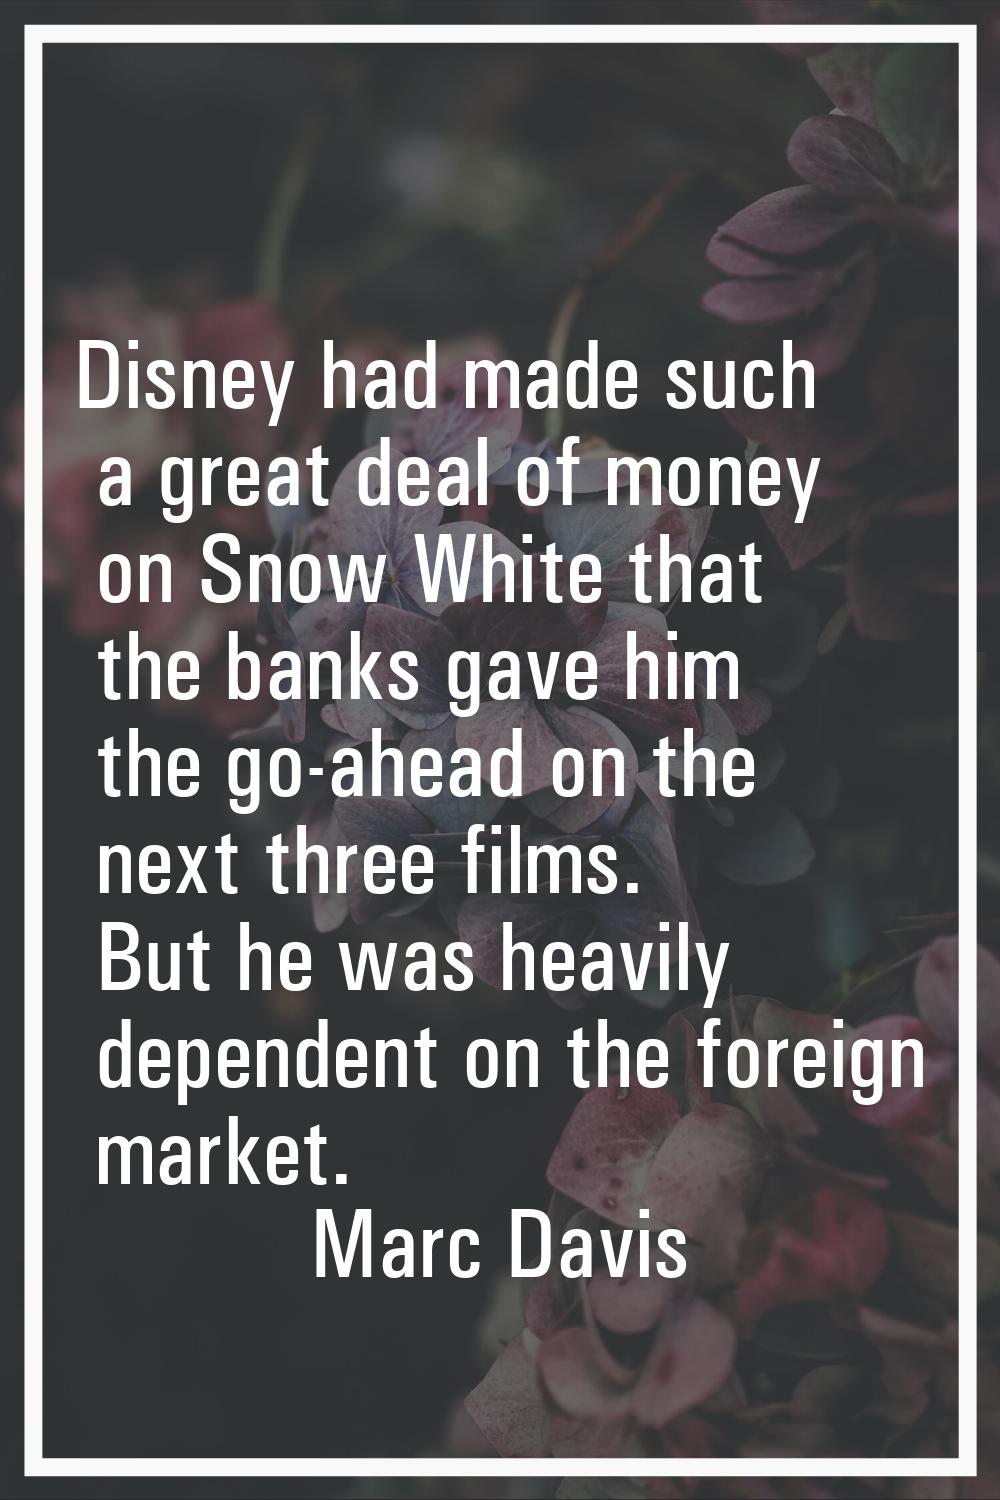 Disney had made such a great deal of money on Snow White that the banks gave him the go-ahead on th